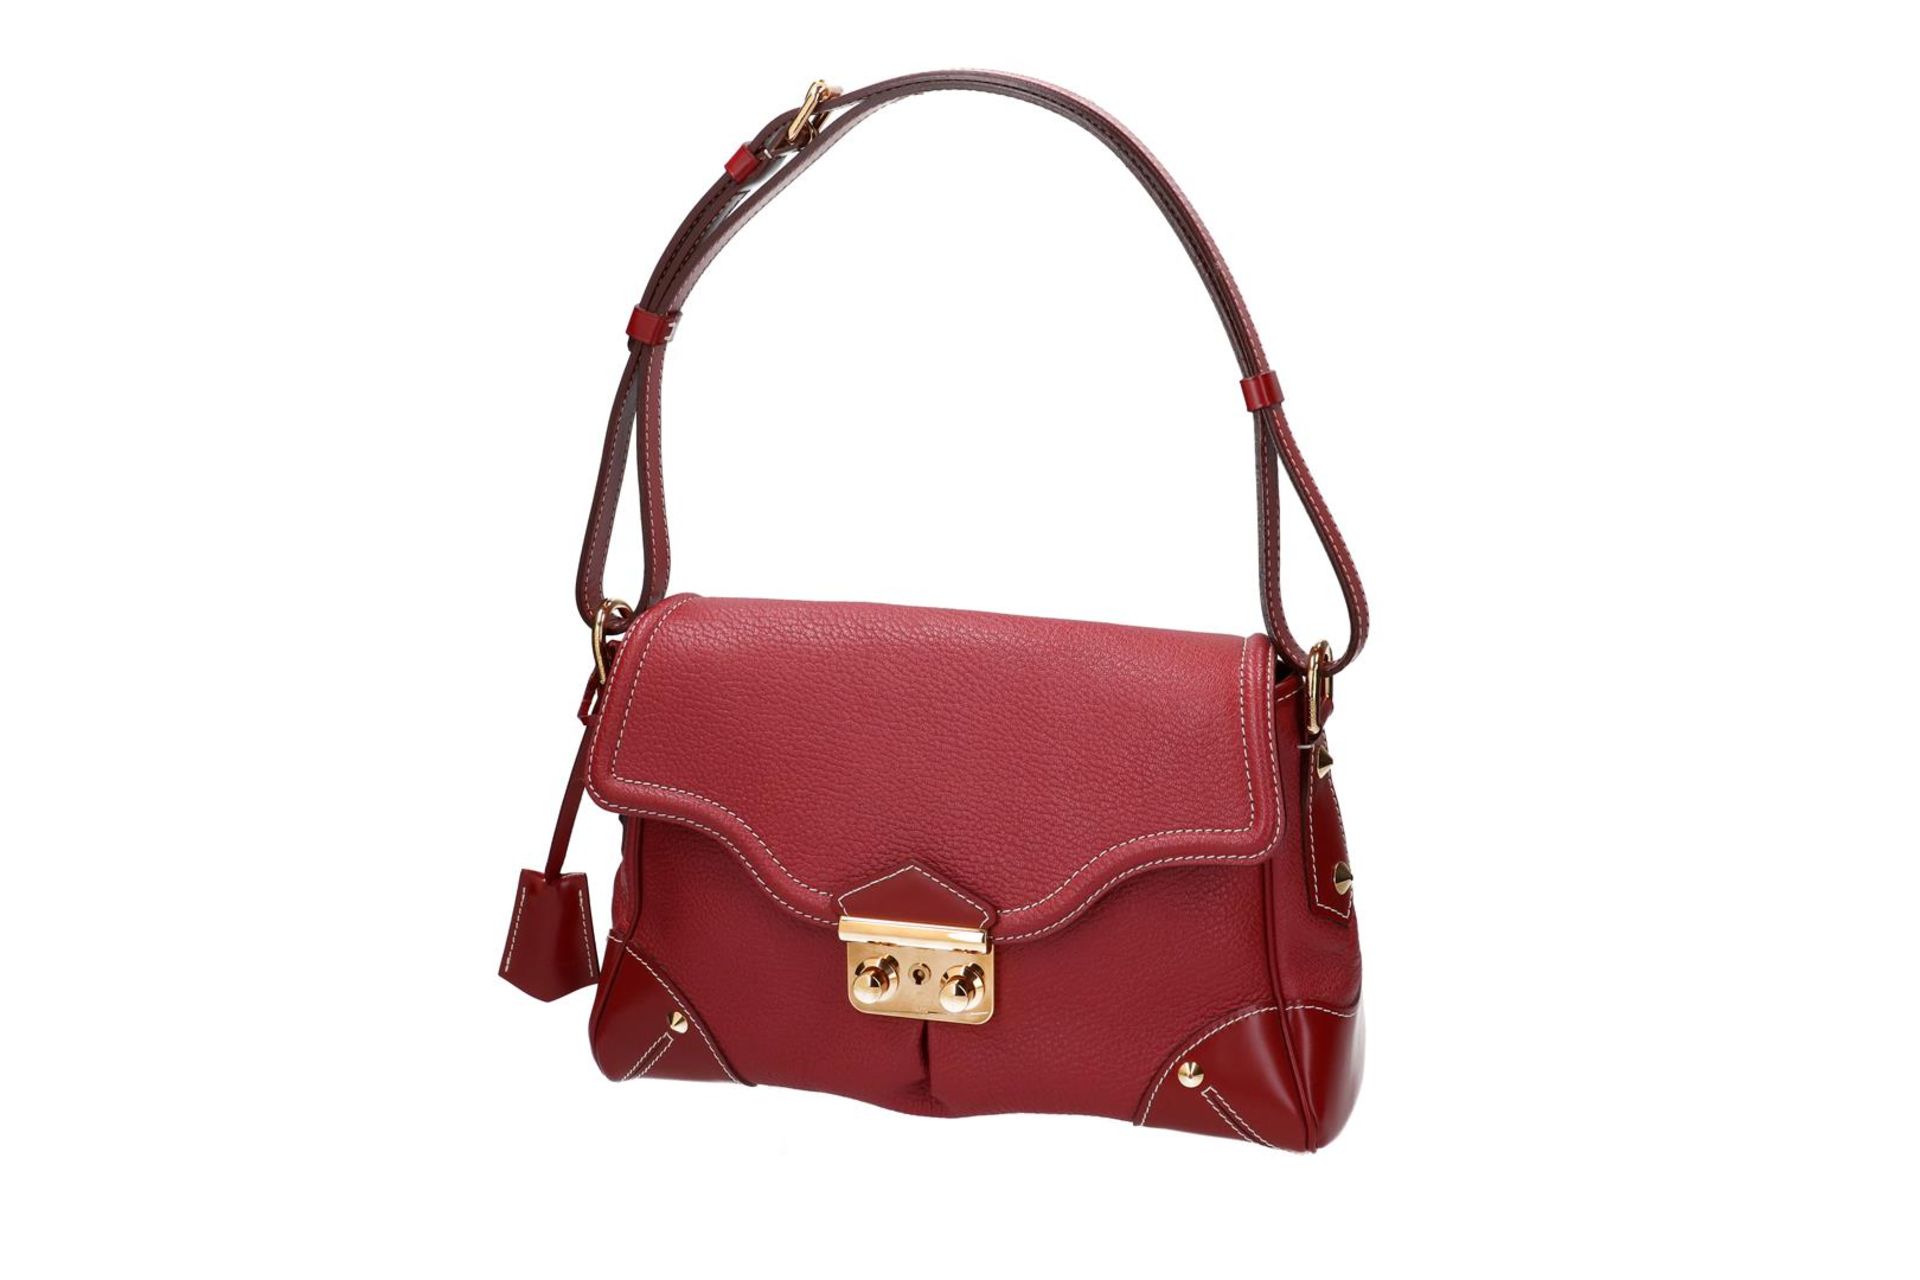 Louis Vuitton, red Suhali leather handbag, 'L'essentiel', with two keys and dustcover. H x W x D: 21